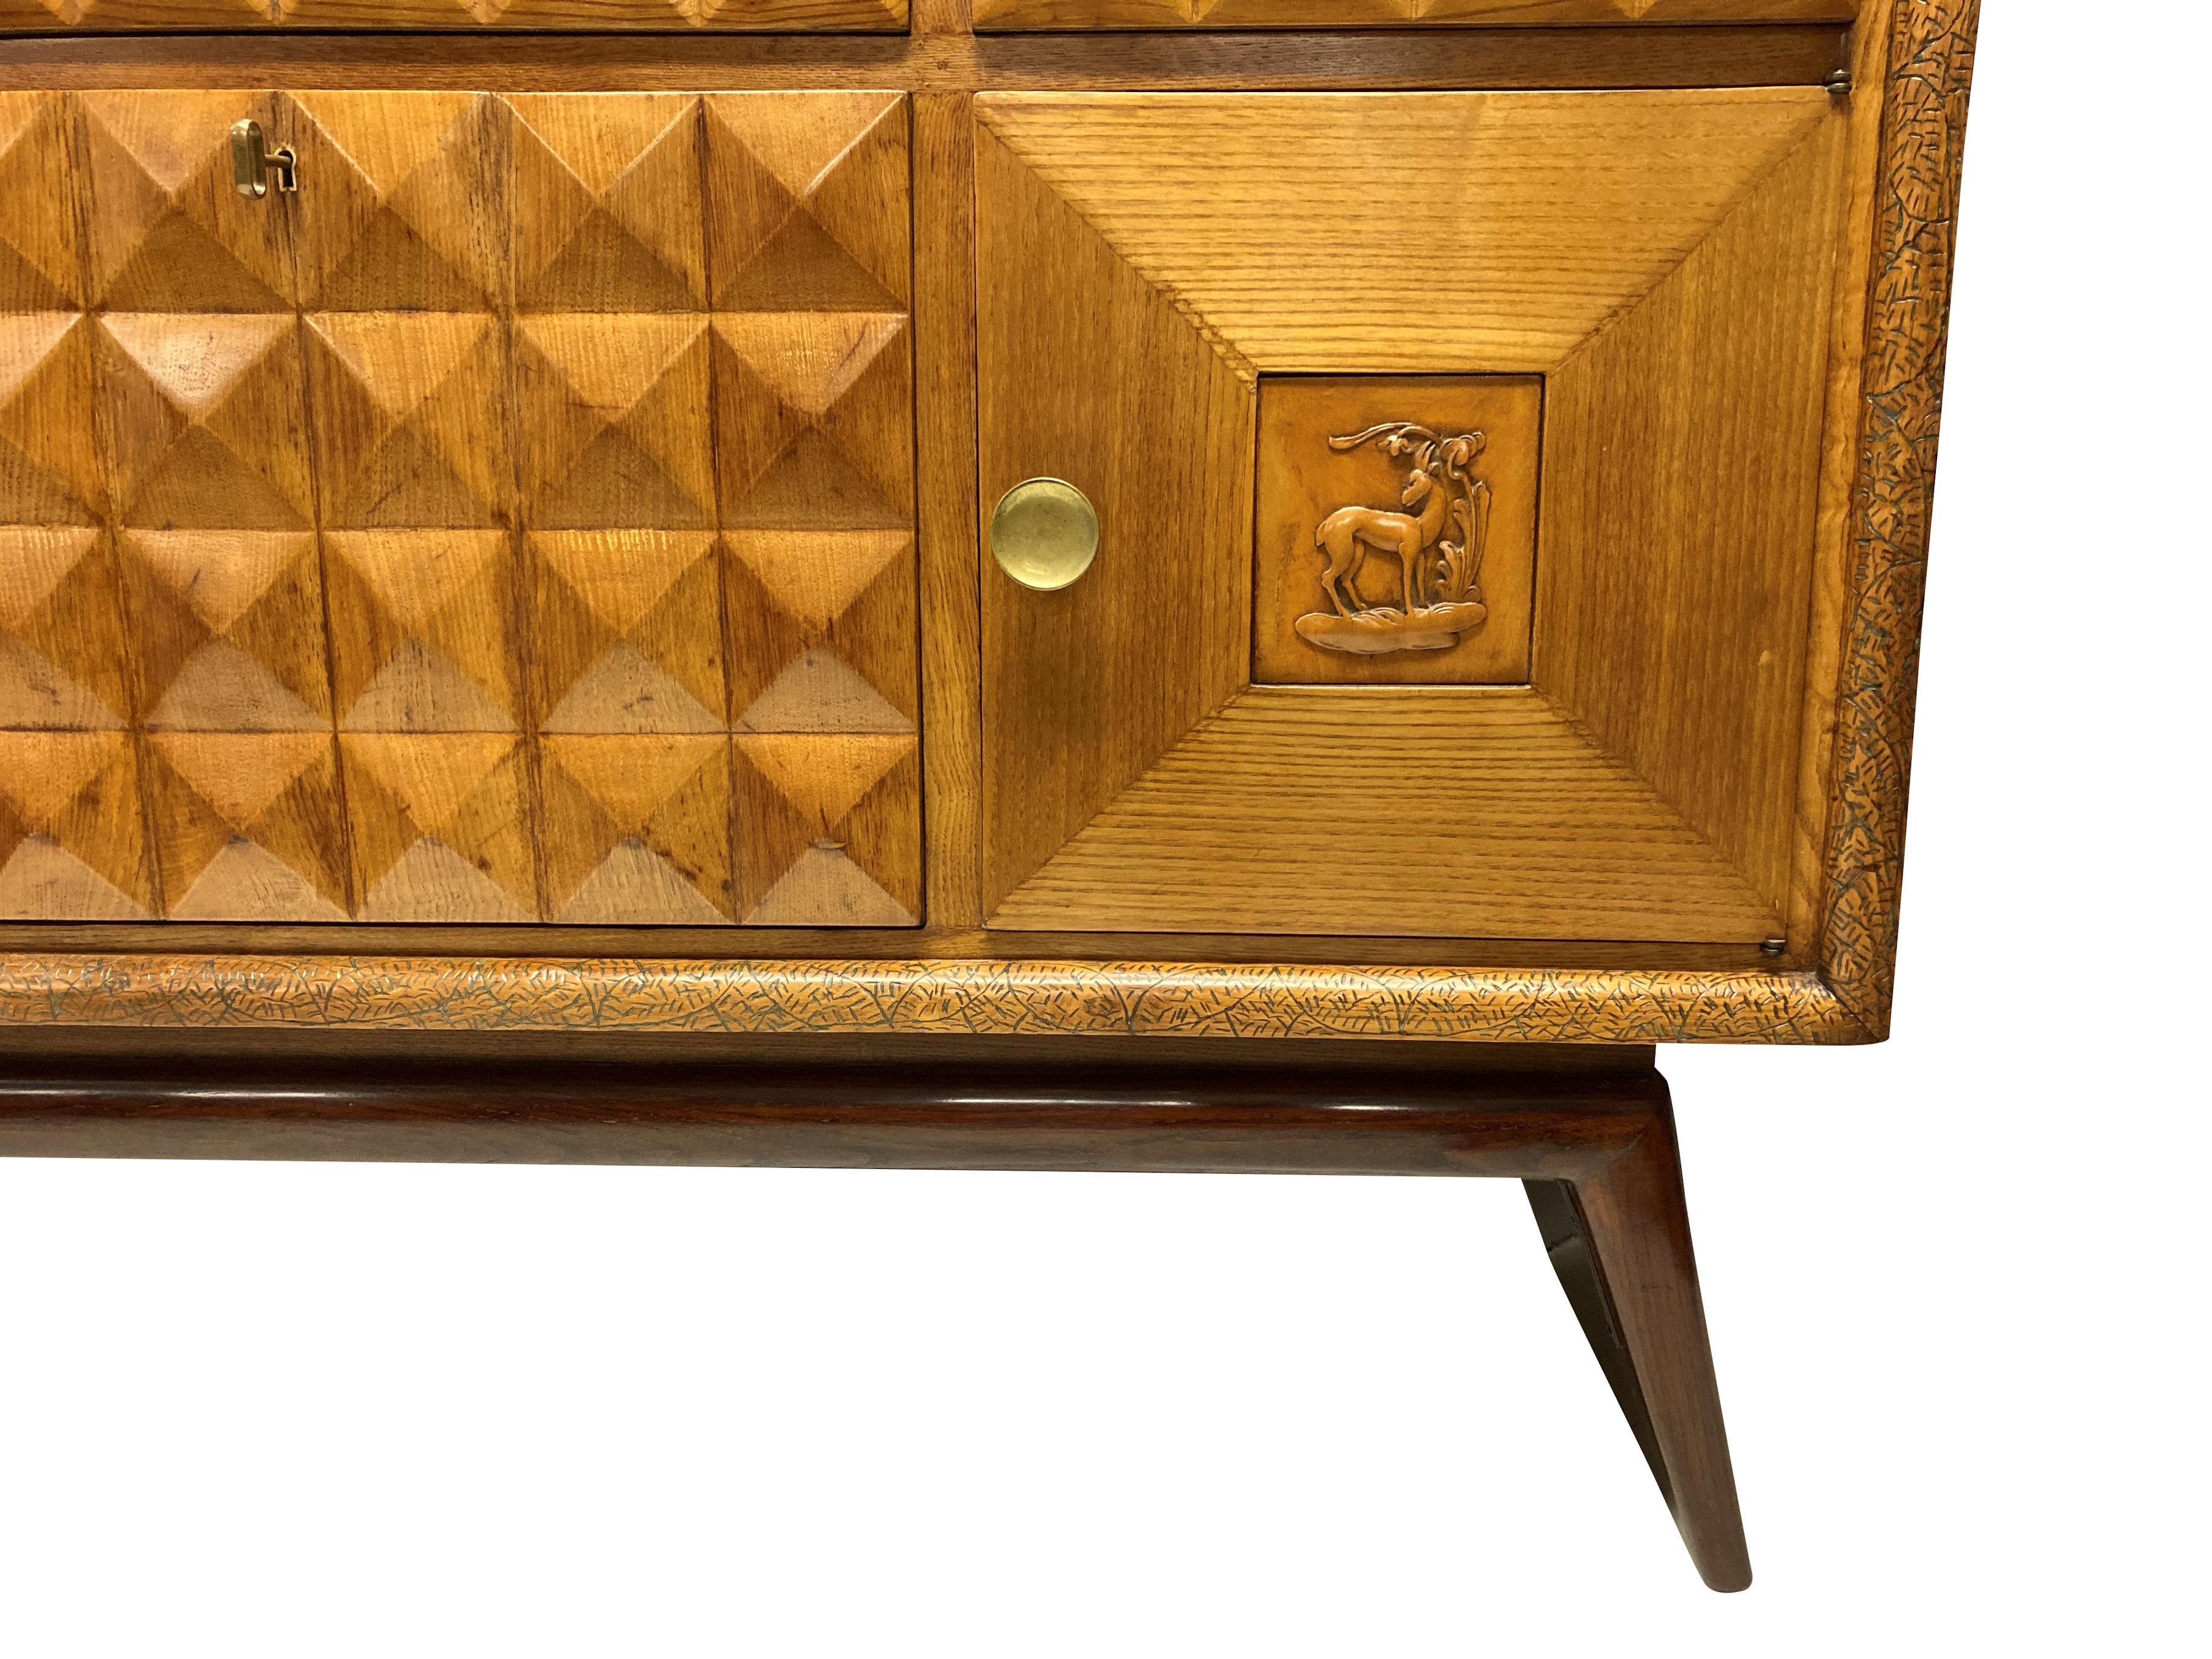 A fine Italian bar credenza by Pier Luigi Colli. In oak, elm and lemon wood, comprising a central fall front bar cabinet, with cupboards and drawers. It has wonderful texture, with a diamond pattern throughout and a faux ivory decorative rail to the